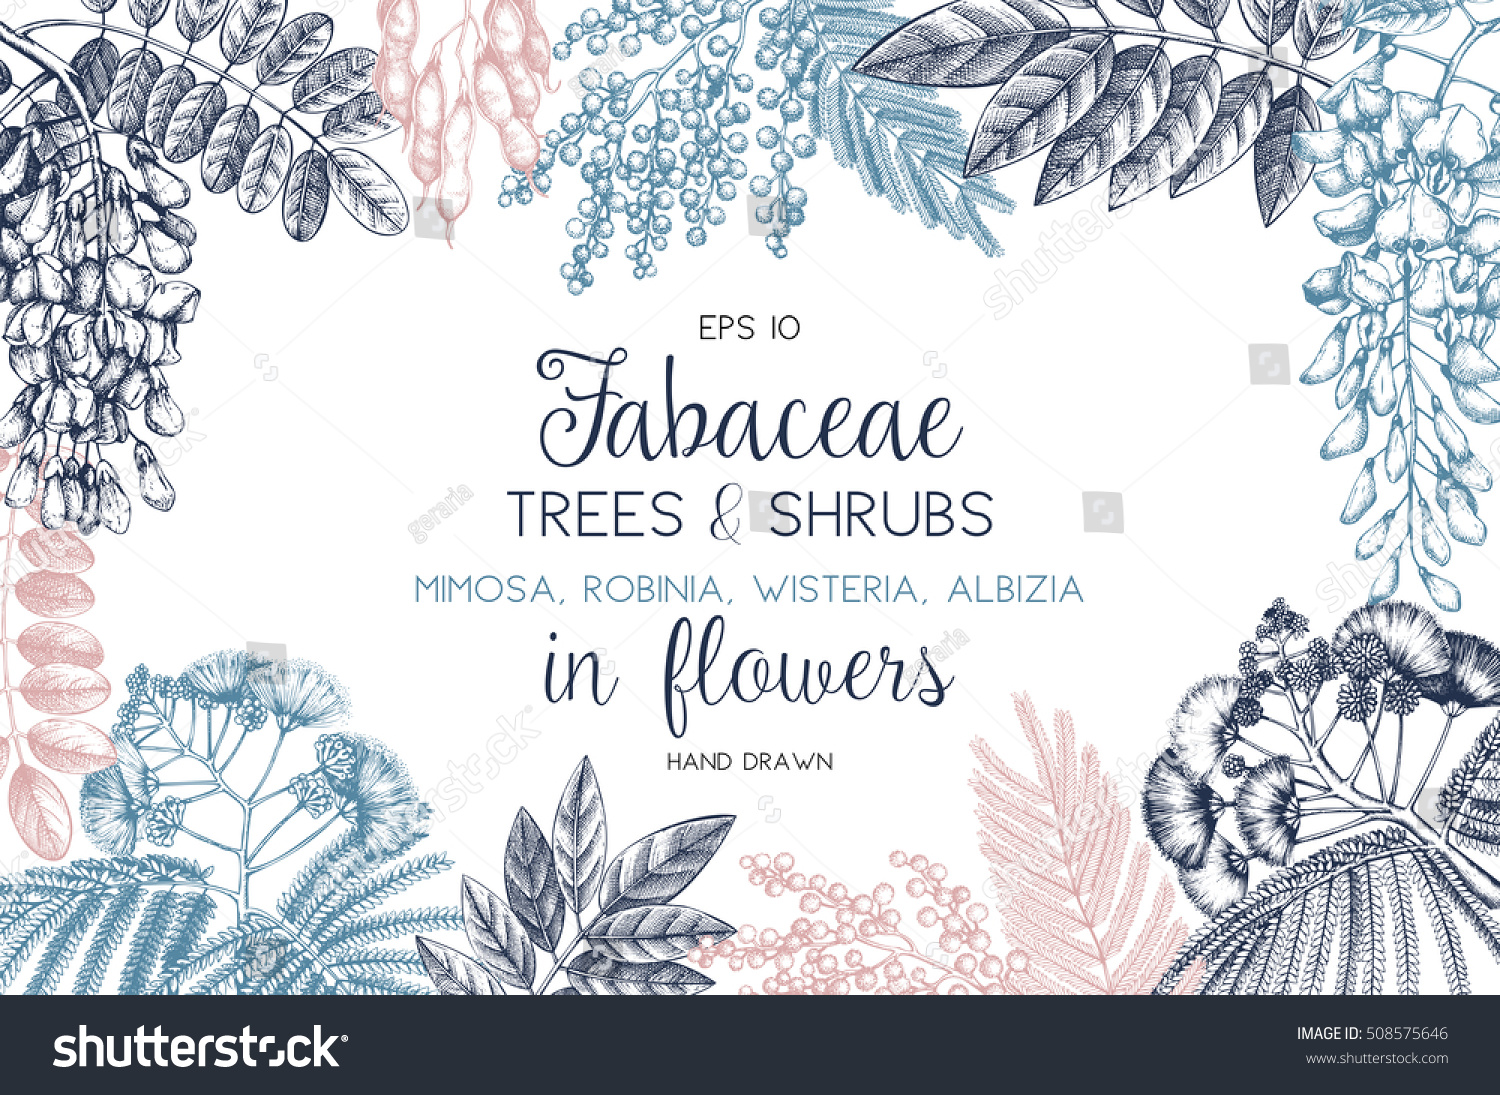 SVG of Vintage trees and shrubs in flowers illustration. Valentine's Day or Wedding design template on chalkboard. Vector greeting card with hand drawn wisteria, black locust, silver wattle, albizia sketch.  svg